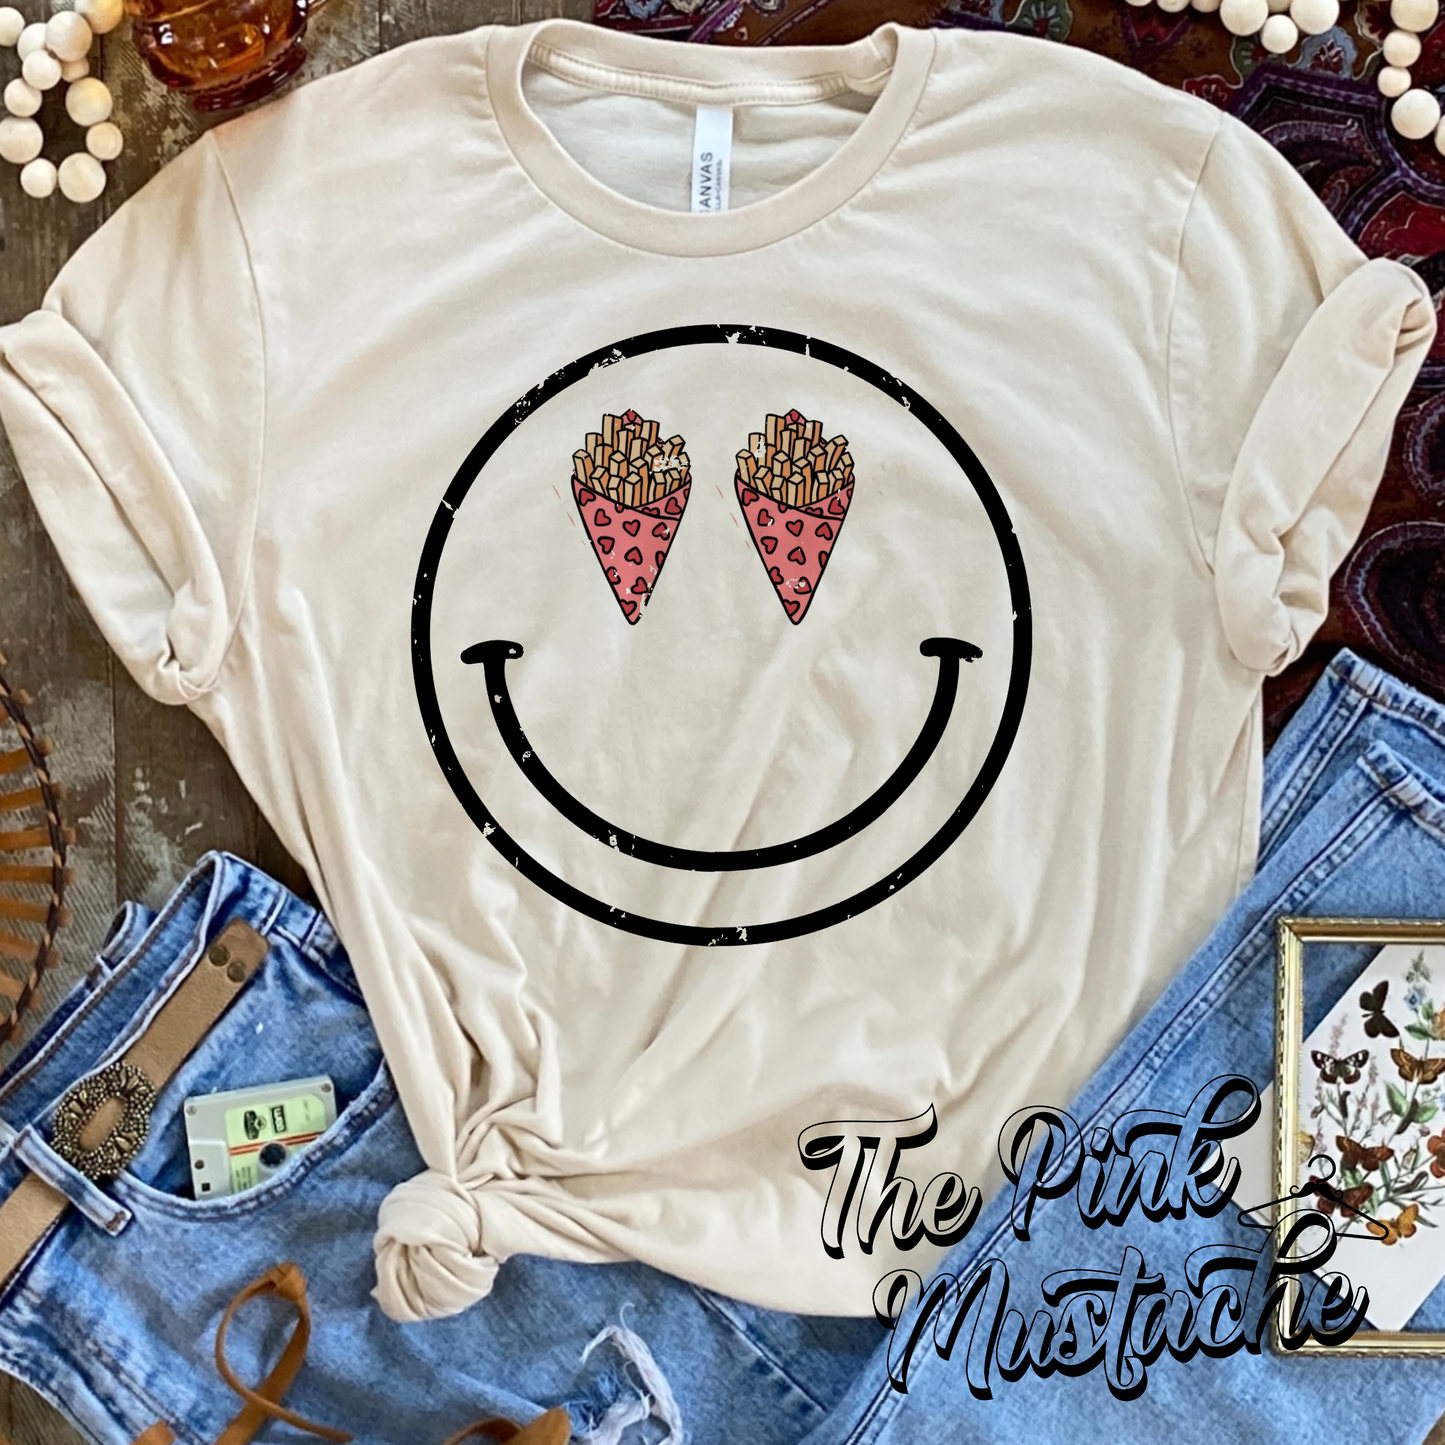 Smiley Fries Tee/ Super Cute Valentine's Tee - Toddler, Youth, and Adult Sizing Available